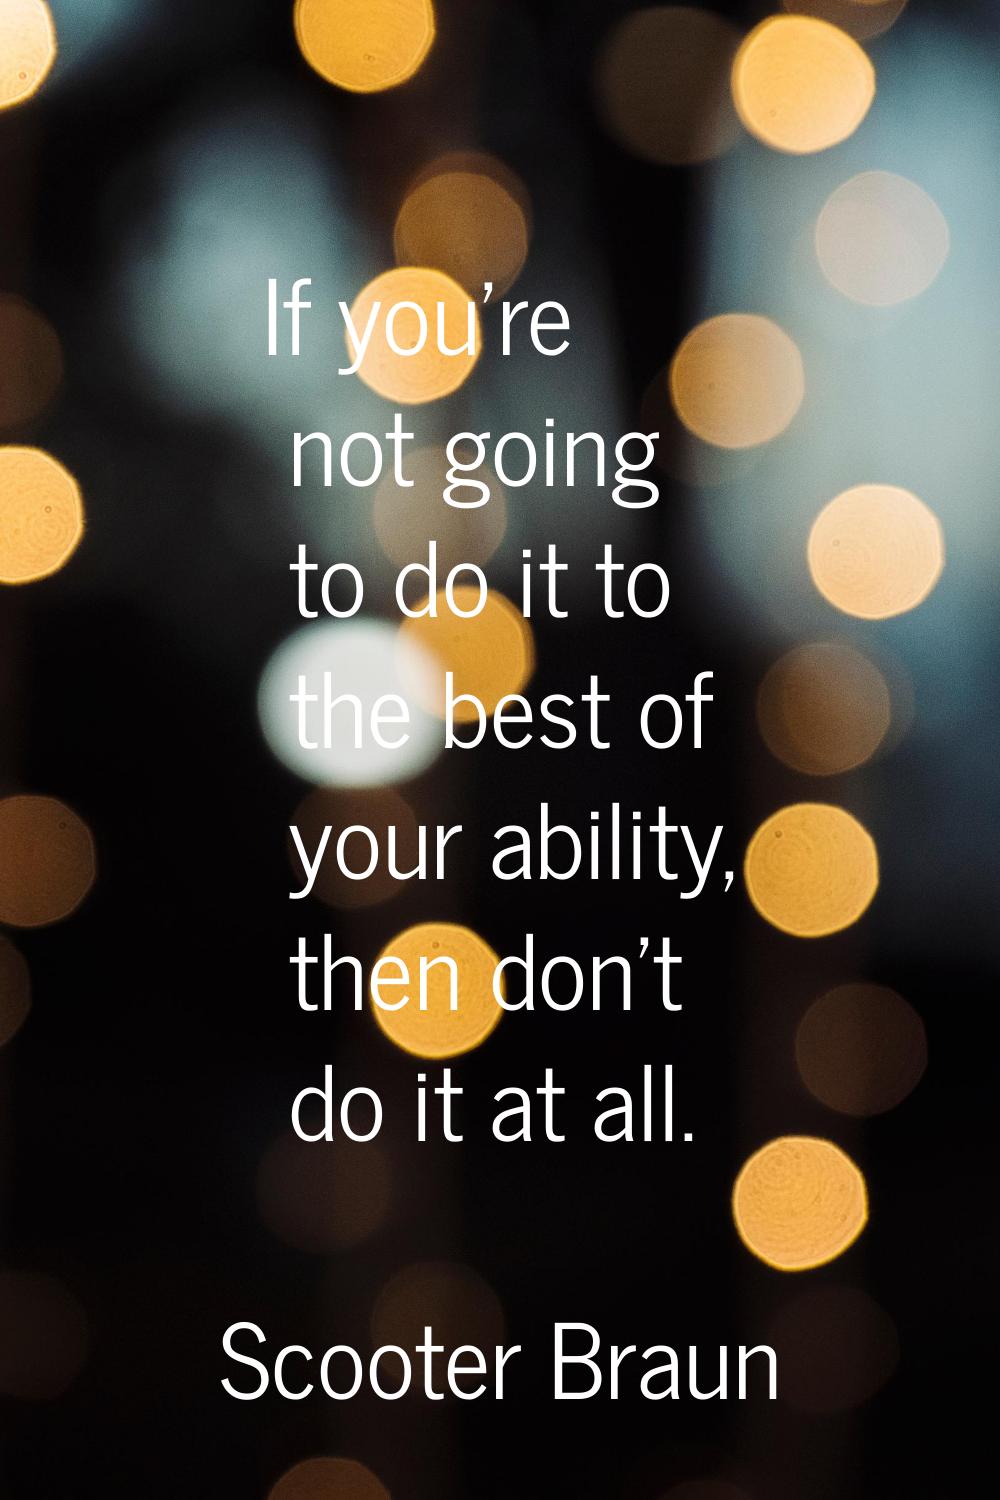 If you're not going to do it to the best of your ability, then don't do it at all.